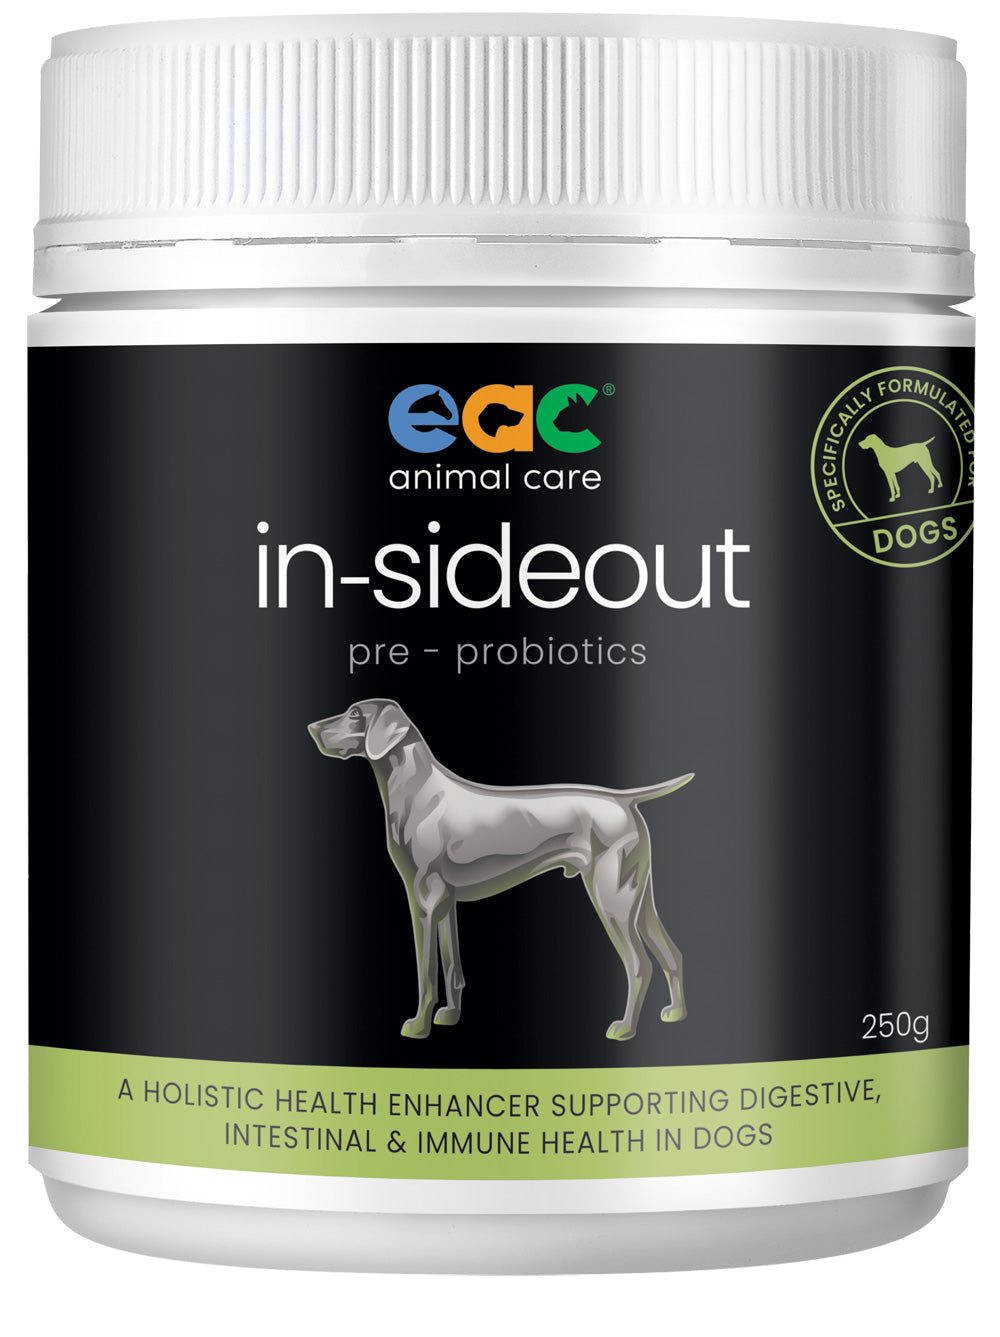 EAC in-sideout Pre & Probiotic Natural Nutraceutical Supplement For Dogs